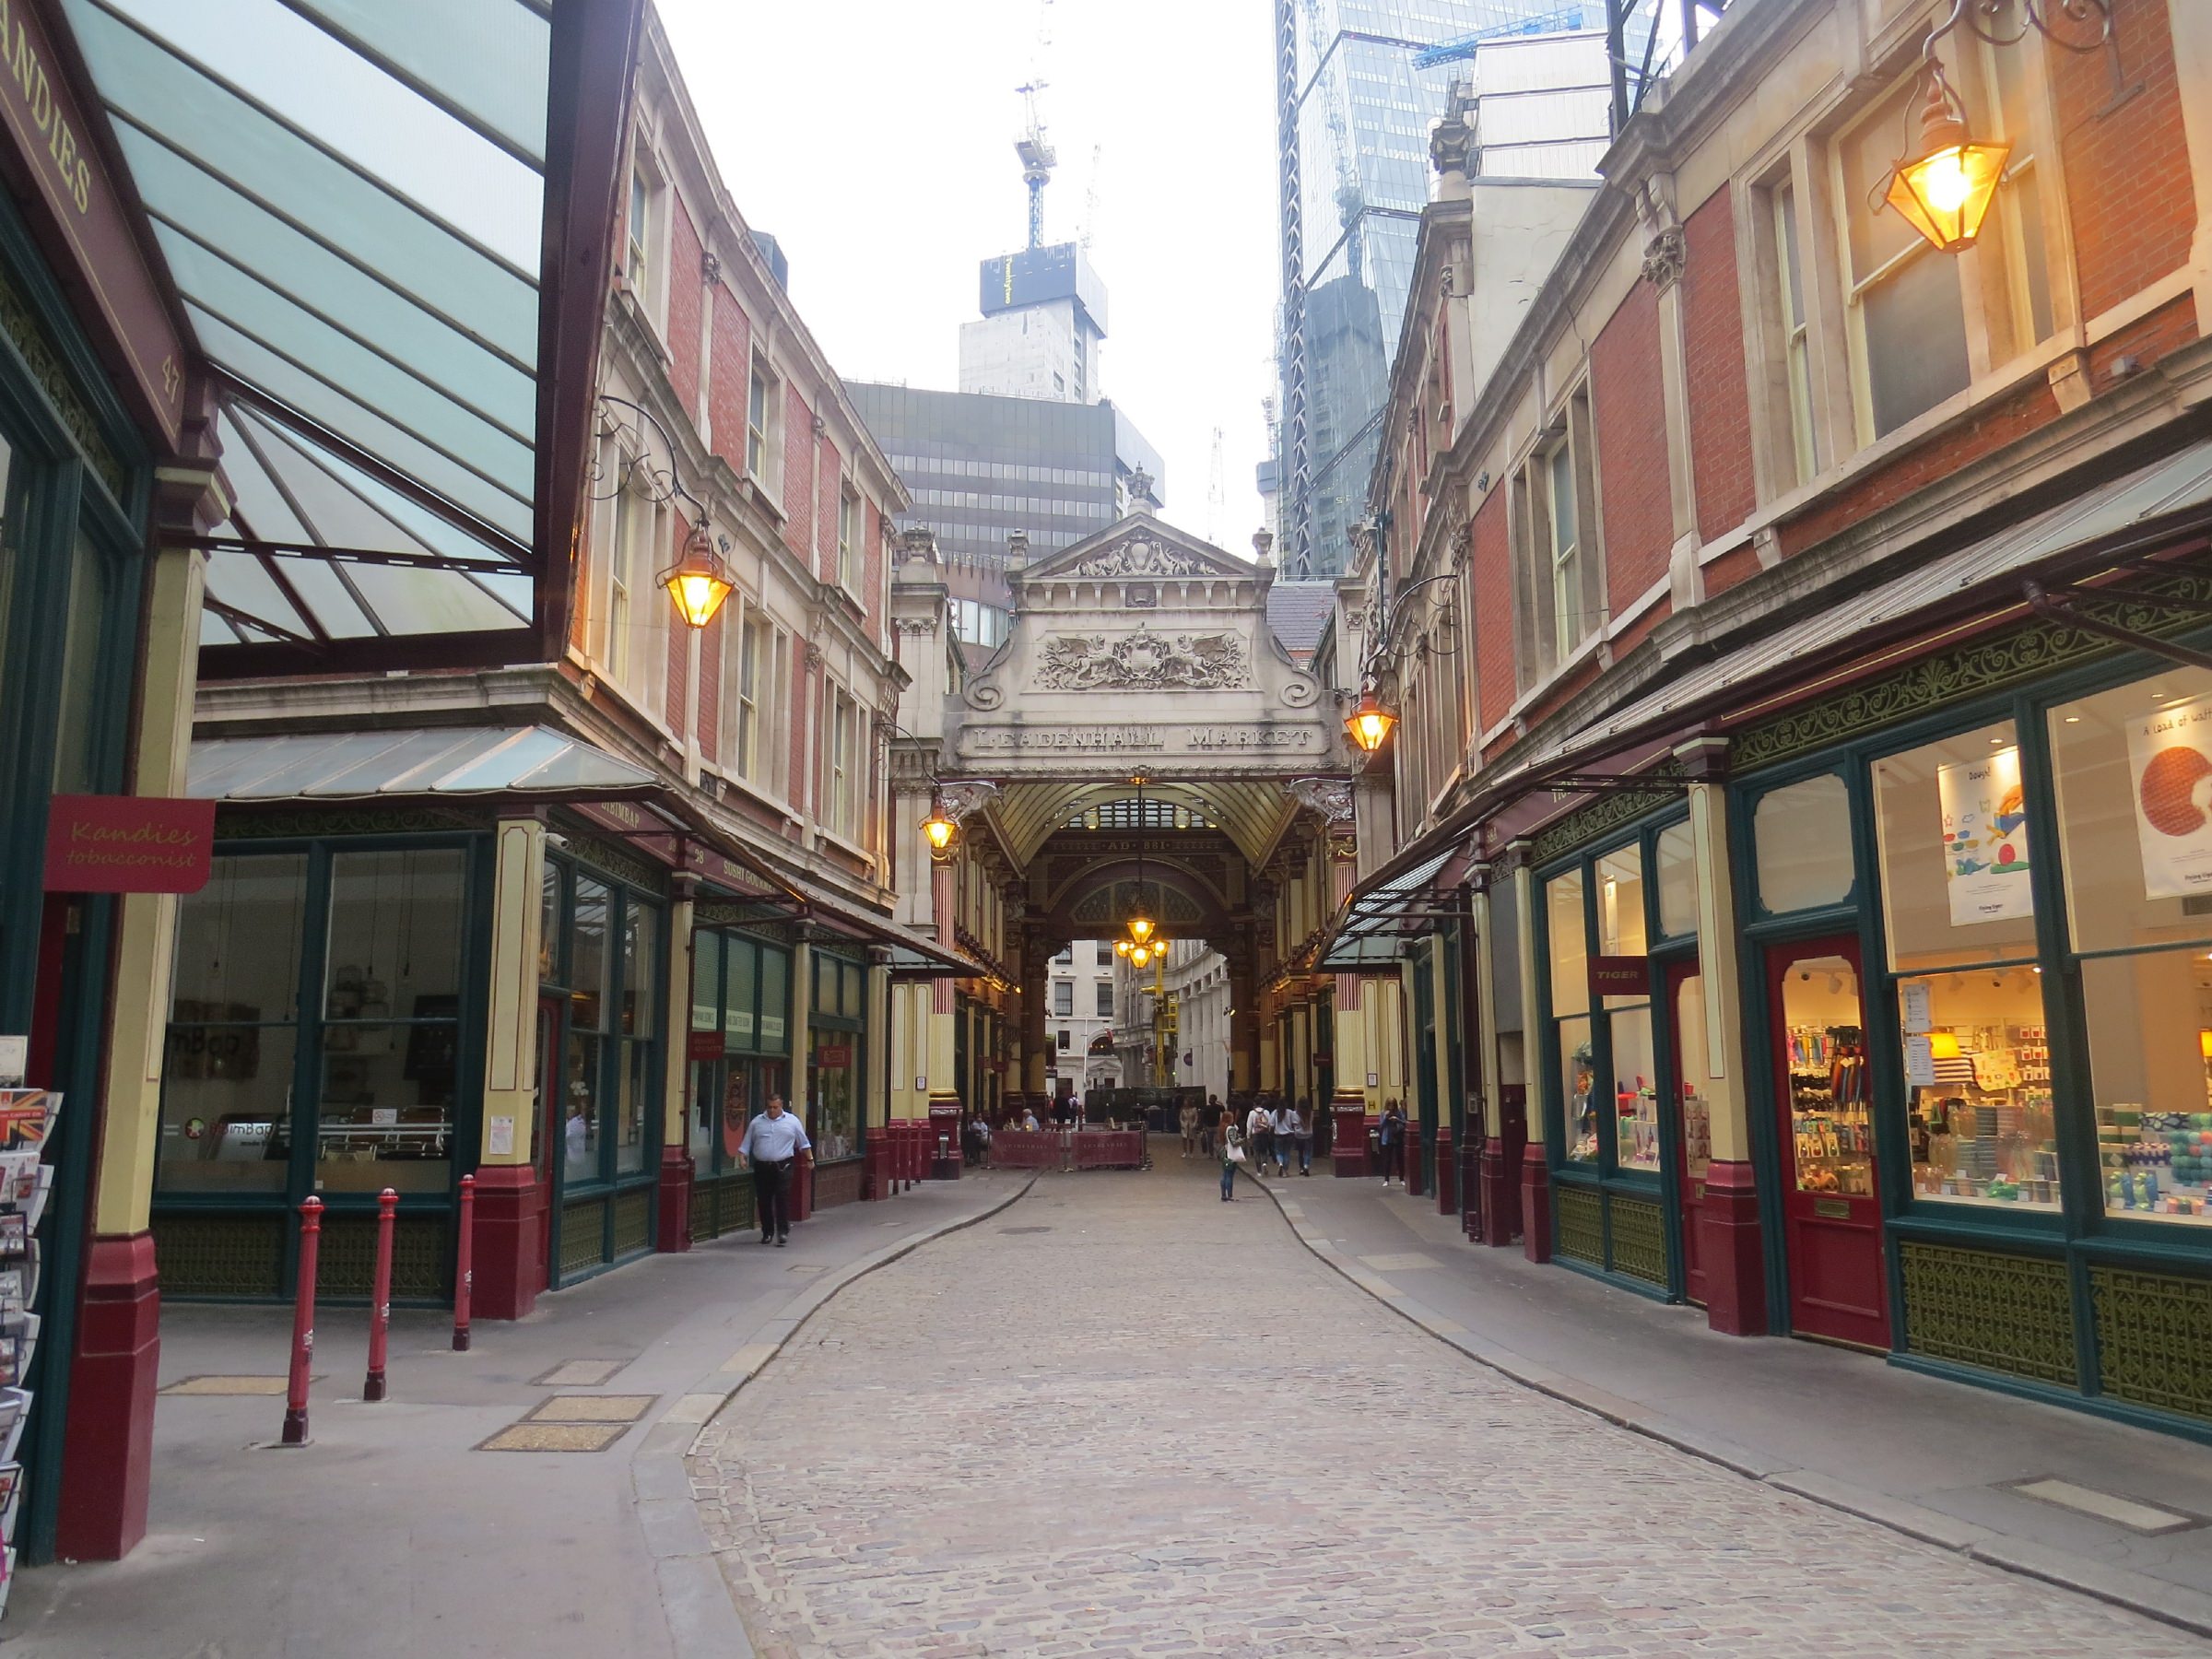 Leadenhall Market | London, England Attractions - Lonely Planet